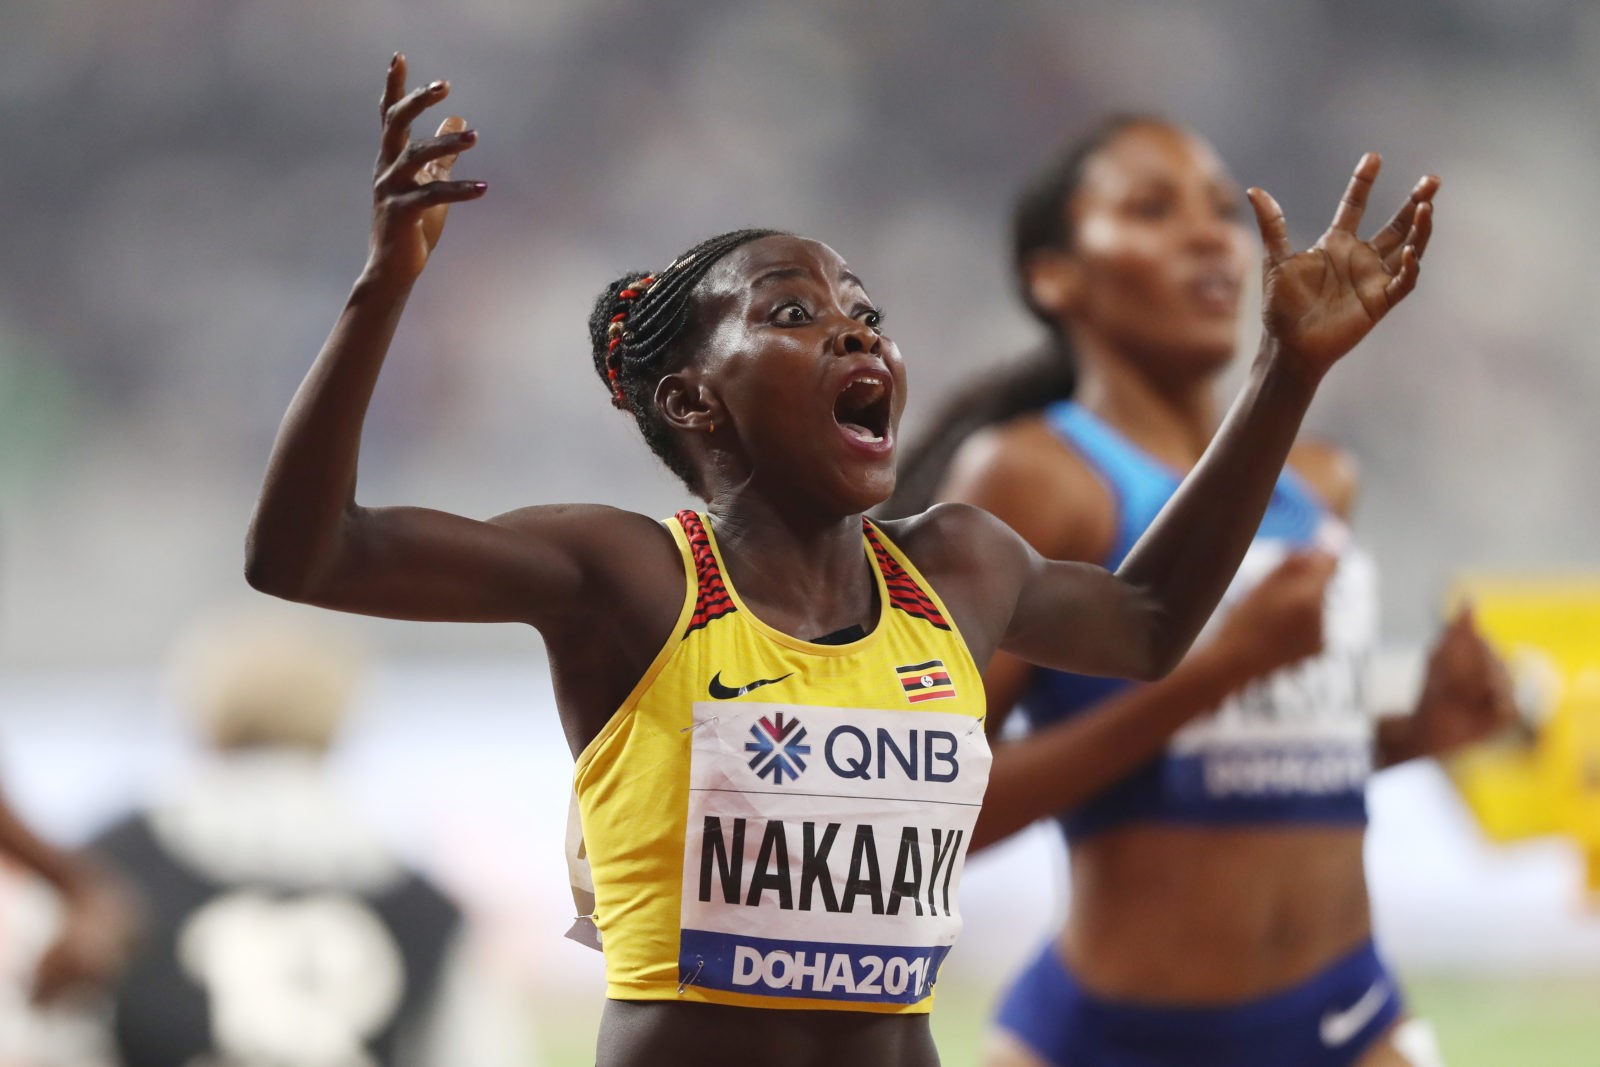 Halimah Nakaayi of Uganda celebrates winning gold in the Women's 800 metres final during day four of 17th IAAF World Athletics Championships Doha 2019 at Khalifa International Stadium on September 30, 2019 in Doha, Qatar. (Photo by Alexander Hassenstein/Getty Images for IAAF)